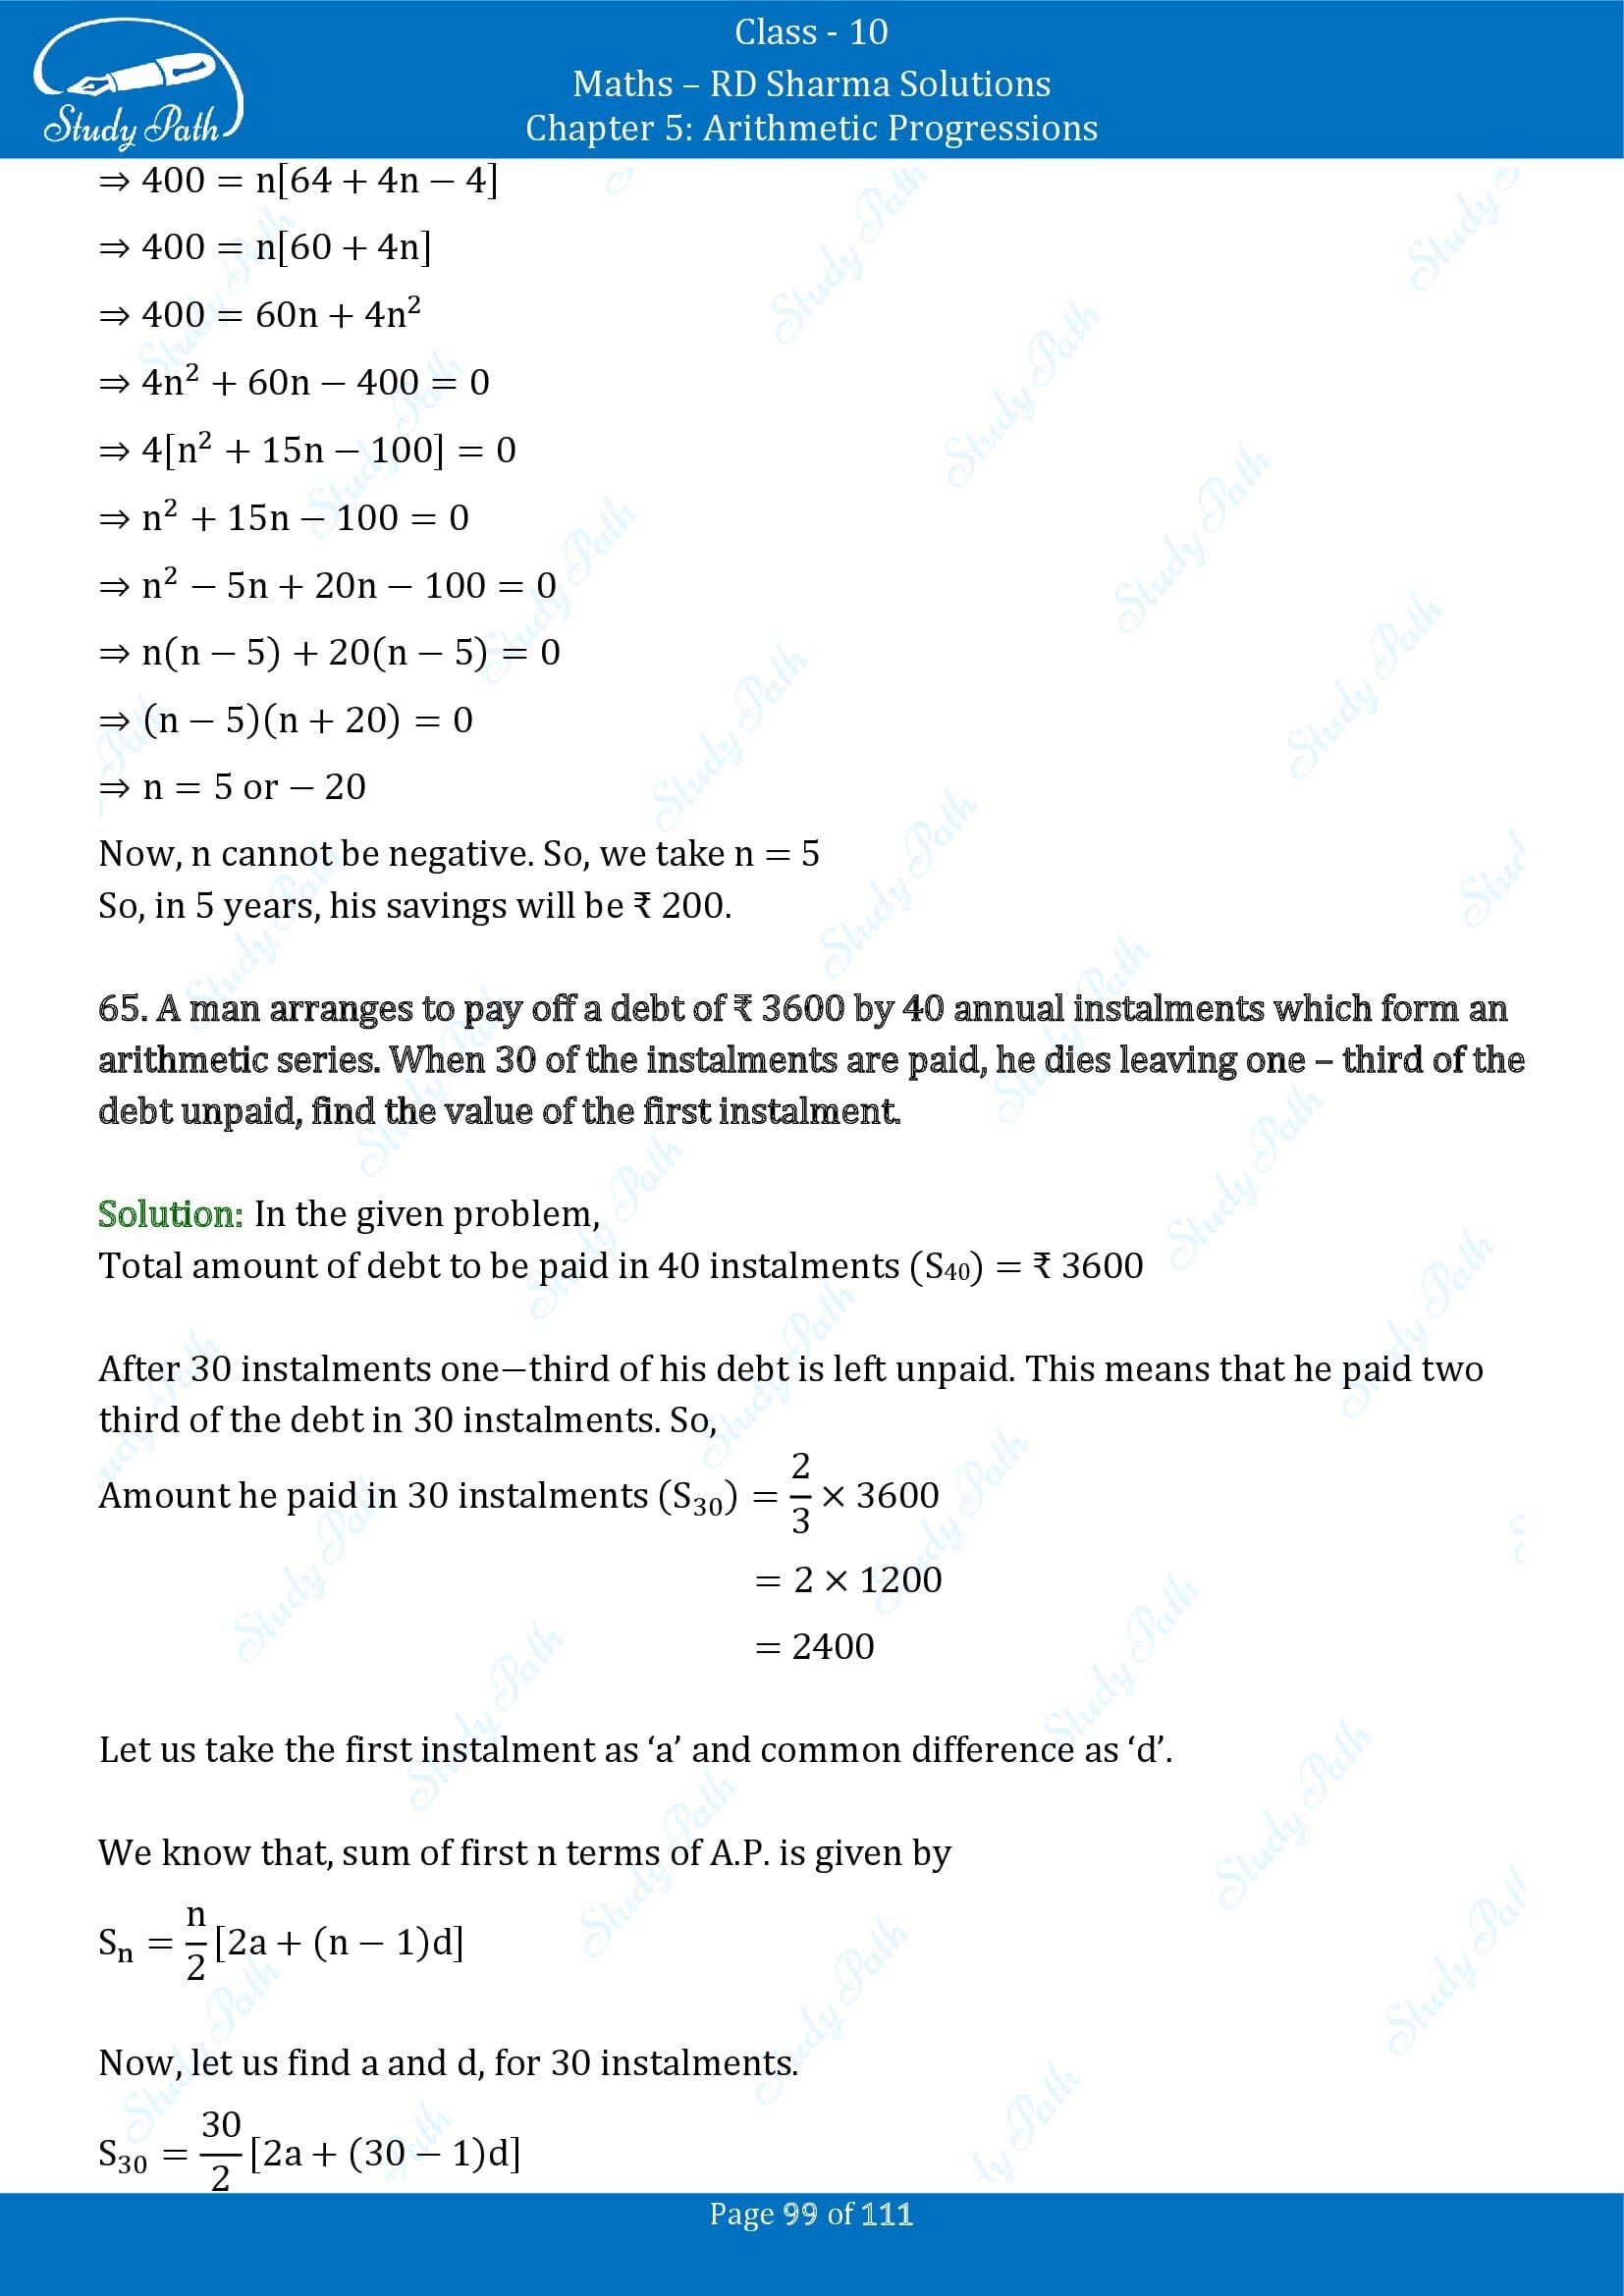 RD Sharma Solutions Class 10 Chapter 5 Arithmetic Progressions Exercise 5.6 00099